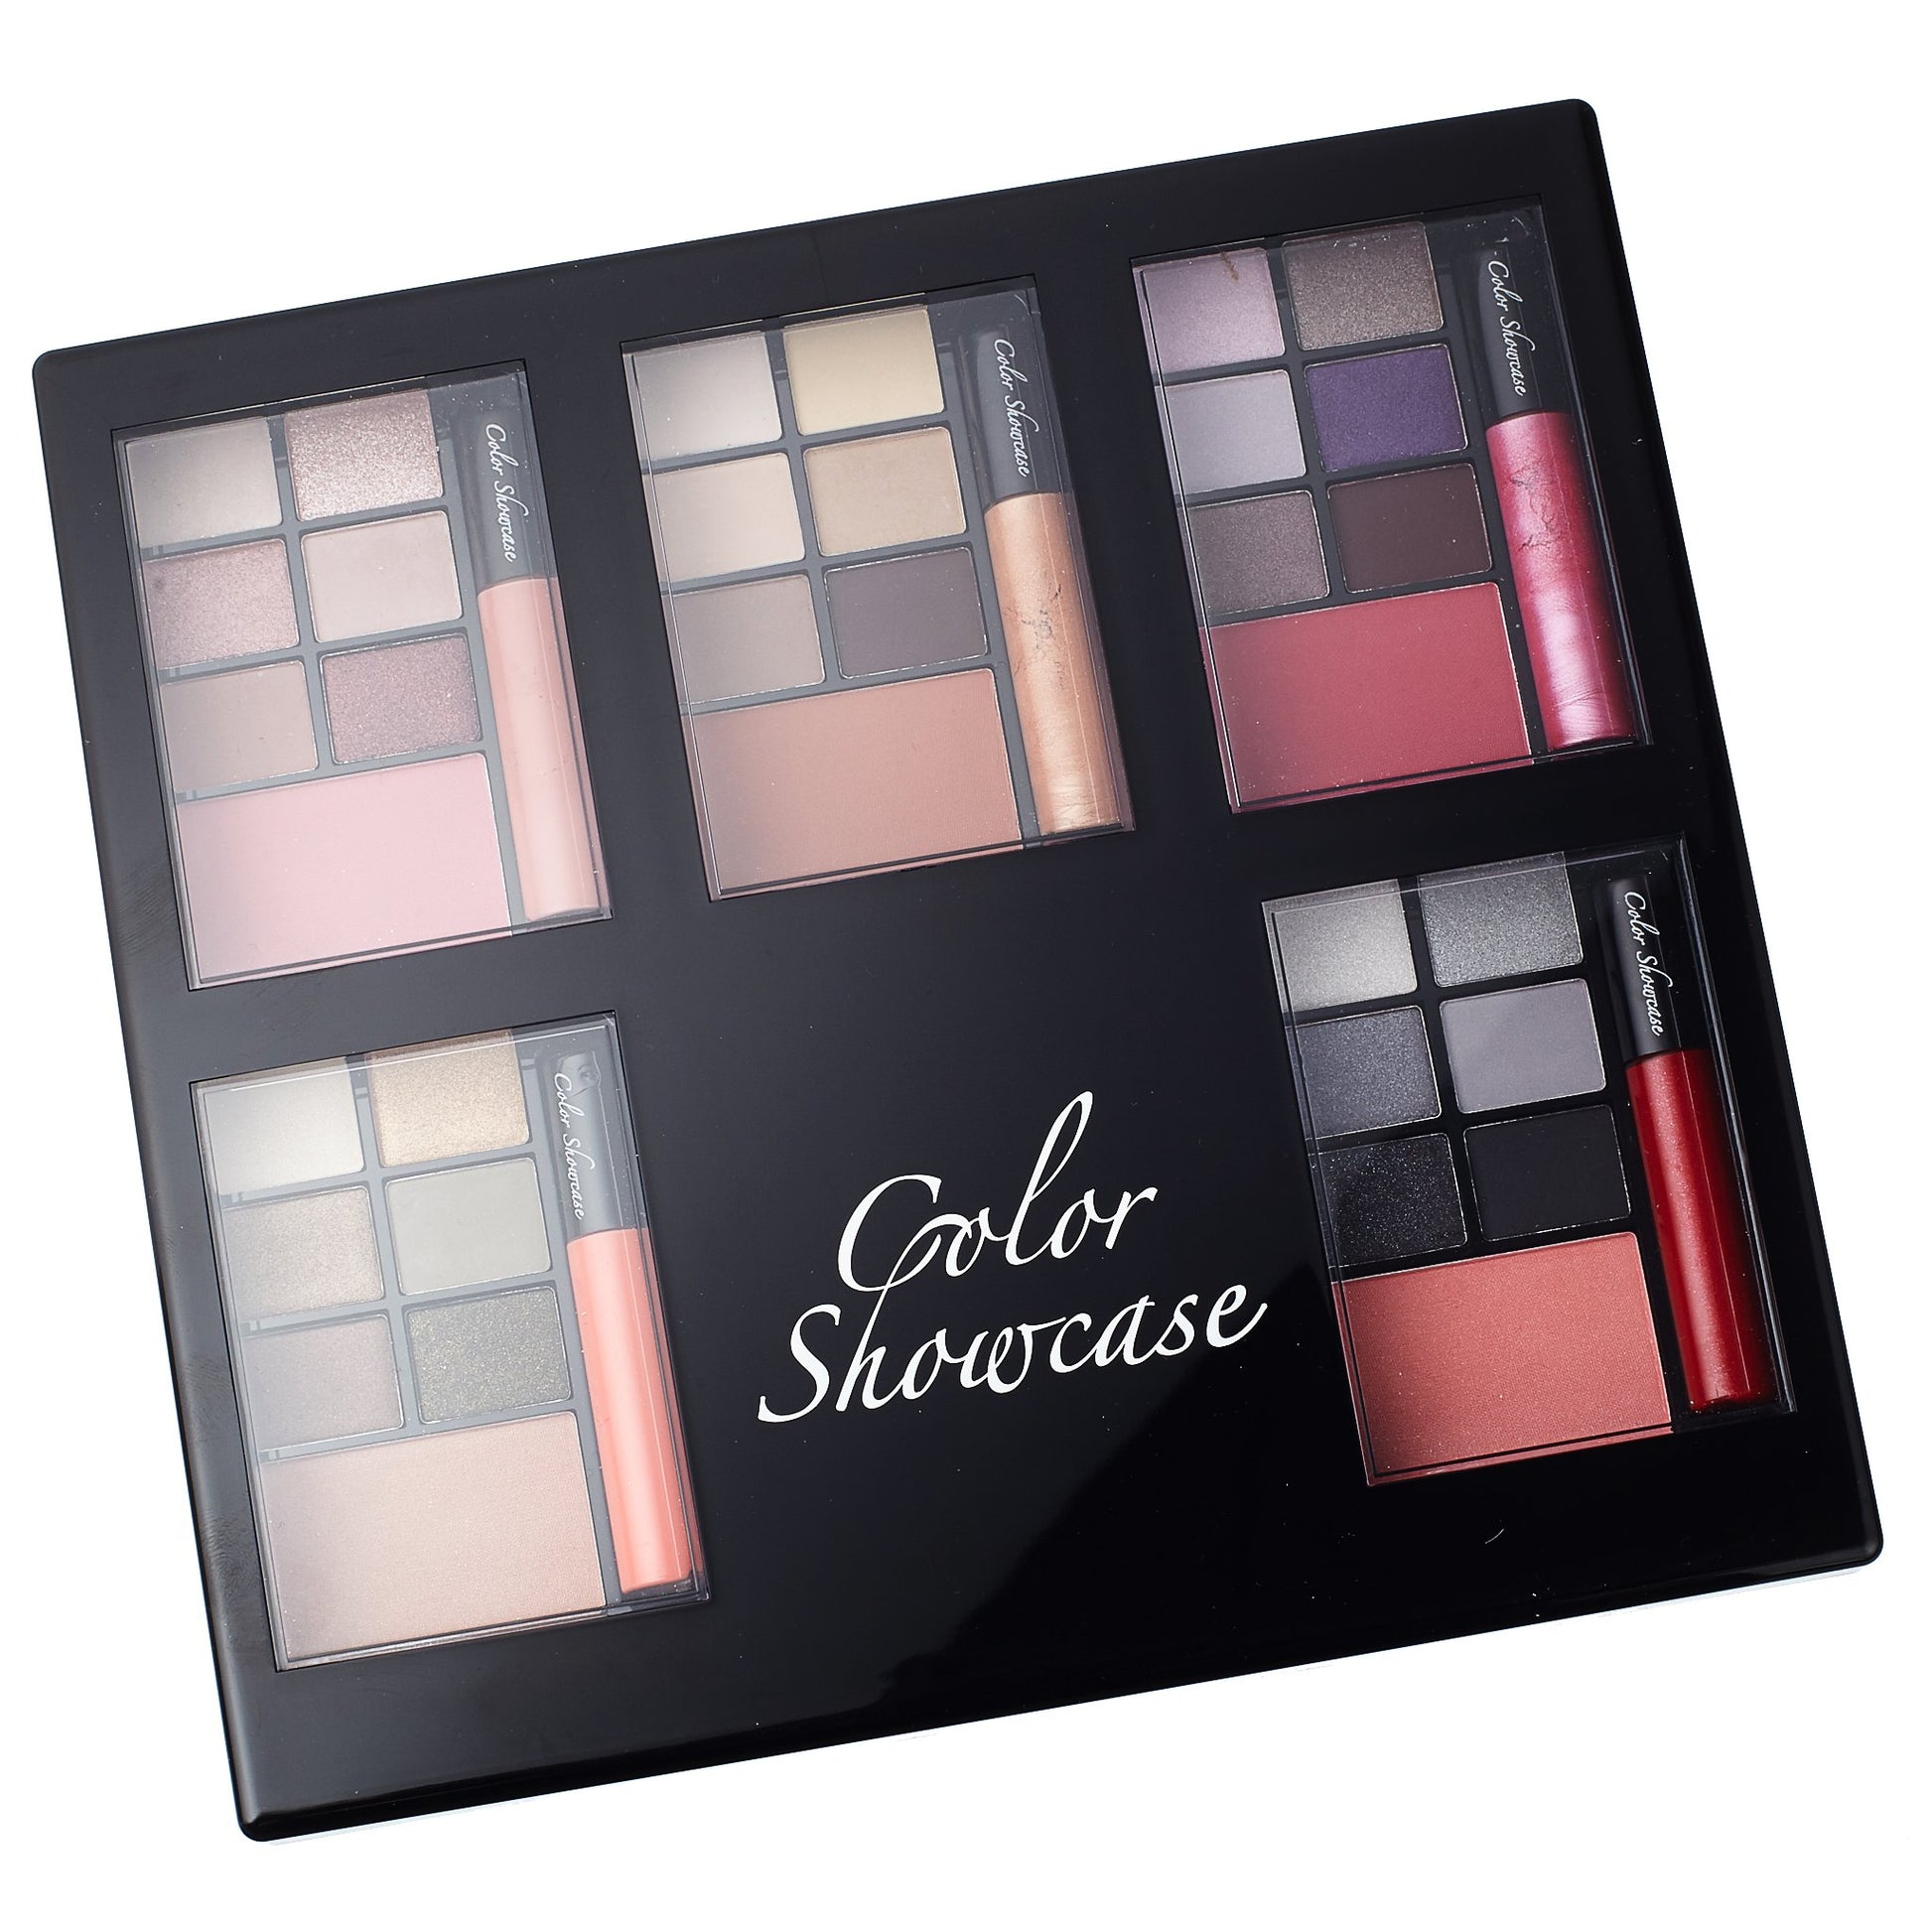 Color Show Case Travel Make Up Compact Set Pallet for Women Click to open in modal